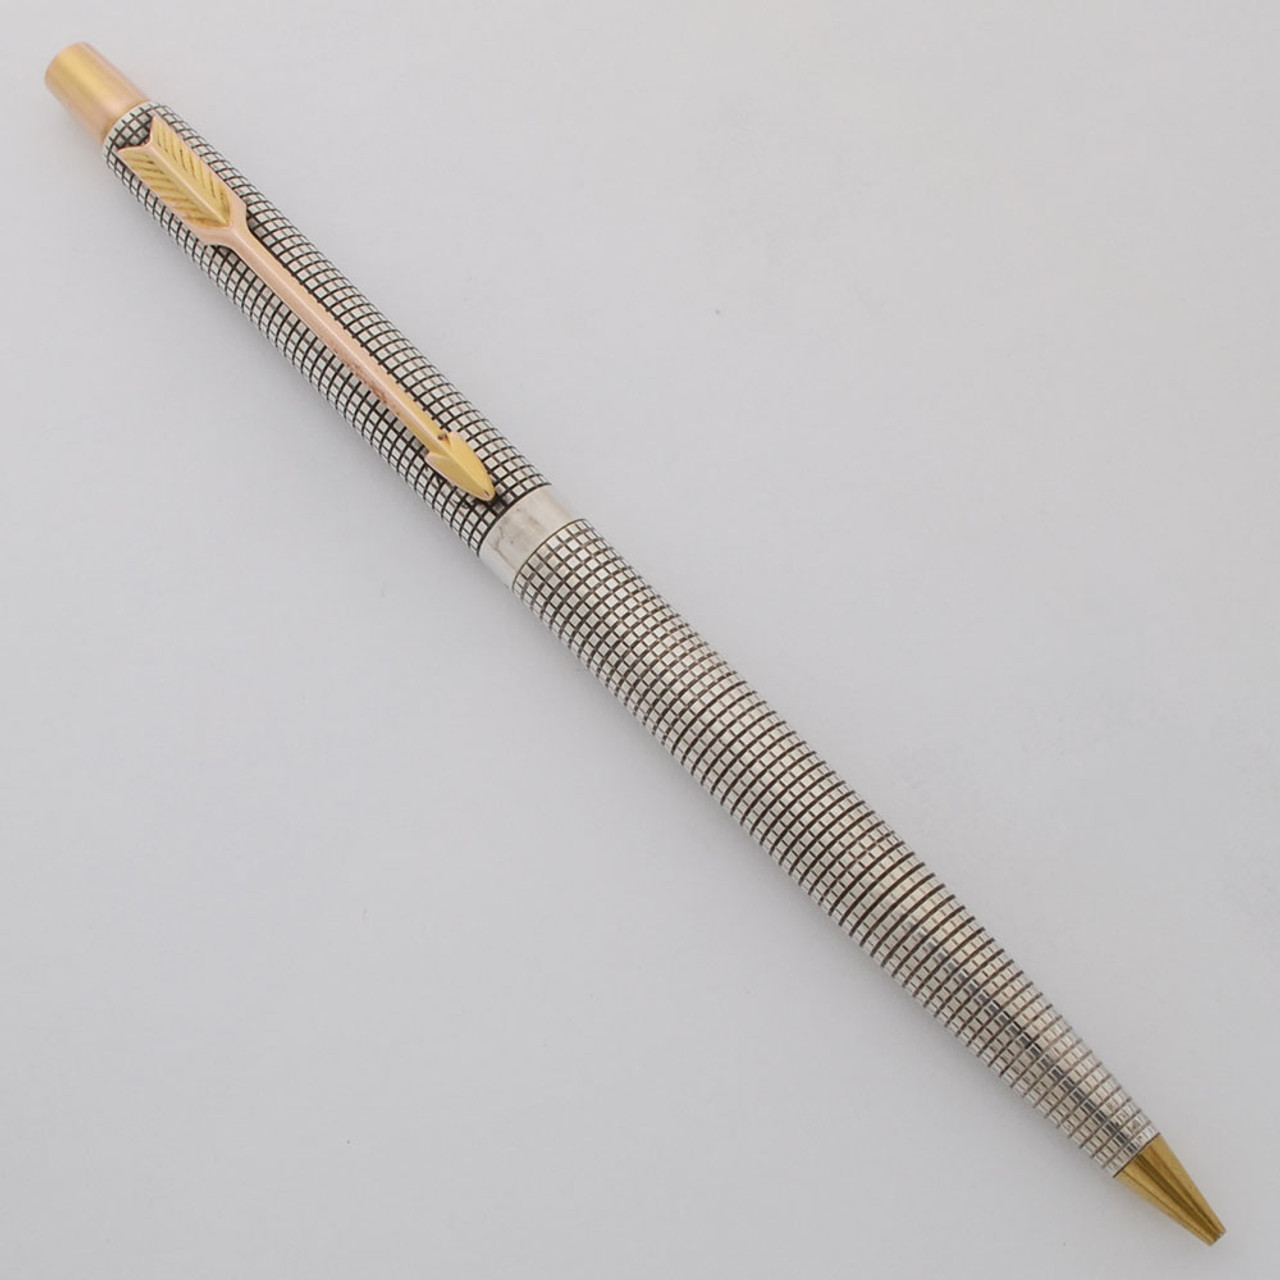 Parker 75 Classic Mechanical Pencil (1970s) - Sterling Silver Cisele, 09mm Leads (Excellent,  Works Well)